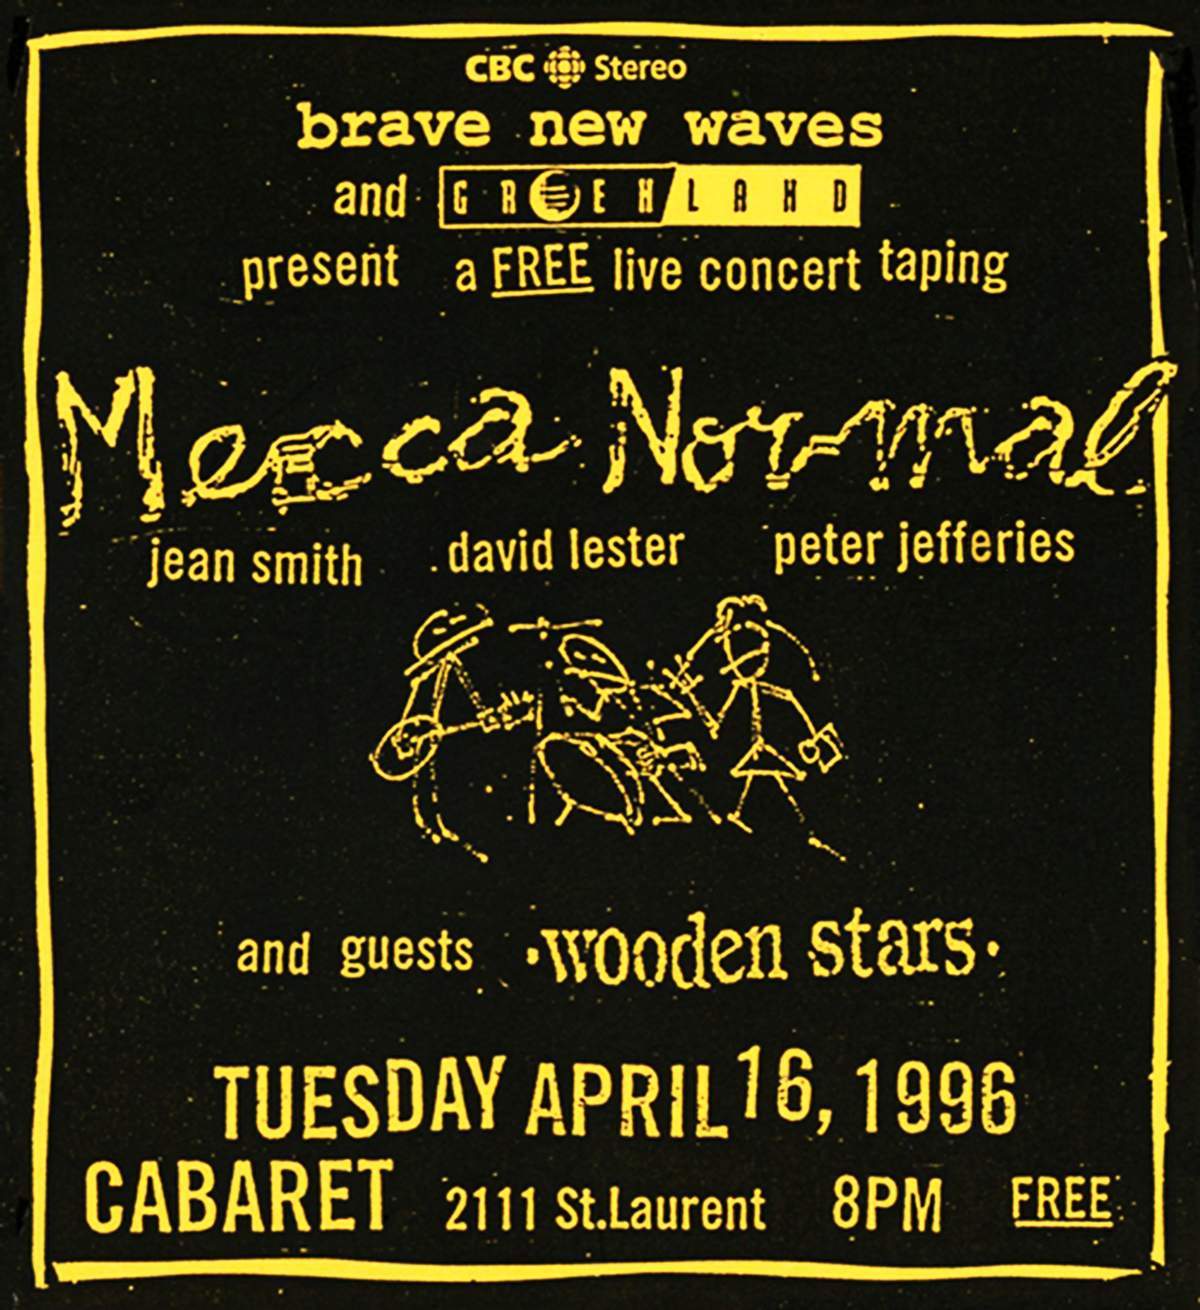 MN-poster-in-Montreal-1996-WEB-version CORRECT spelling JEFFERIES